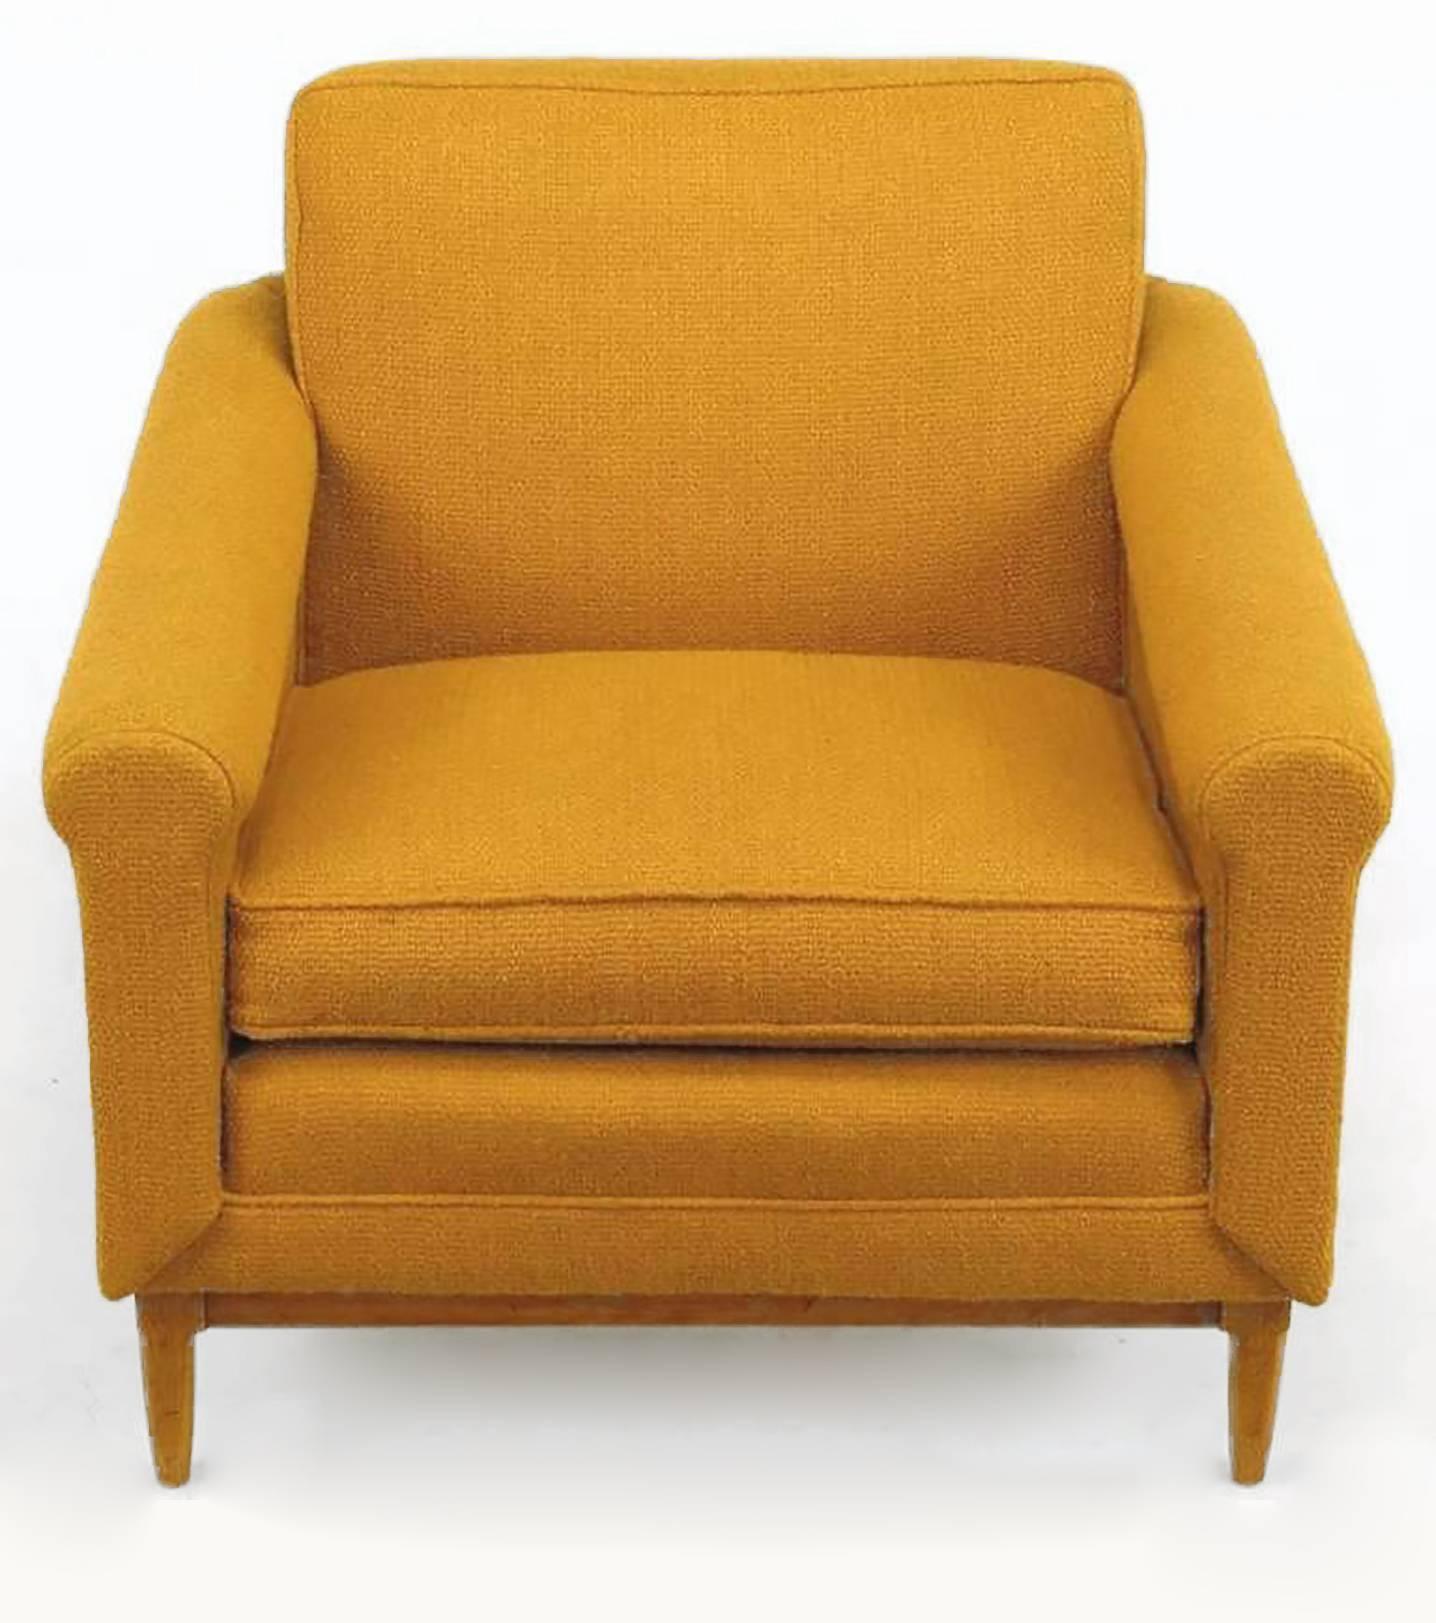 An uncommonly designed chair and ottoman in the manner of Dunbar designs by Edward Wormley. Tubular, amber upholstered arms taper and surround the back of this exceedingly comfortable club chair. Fixed back cushion is supported by an interior wood